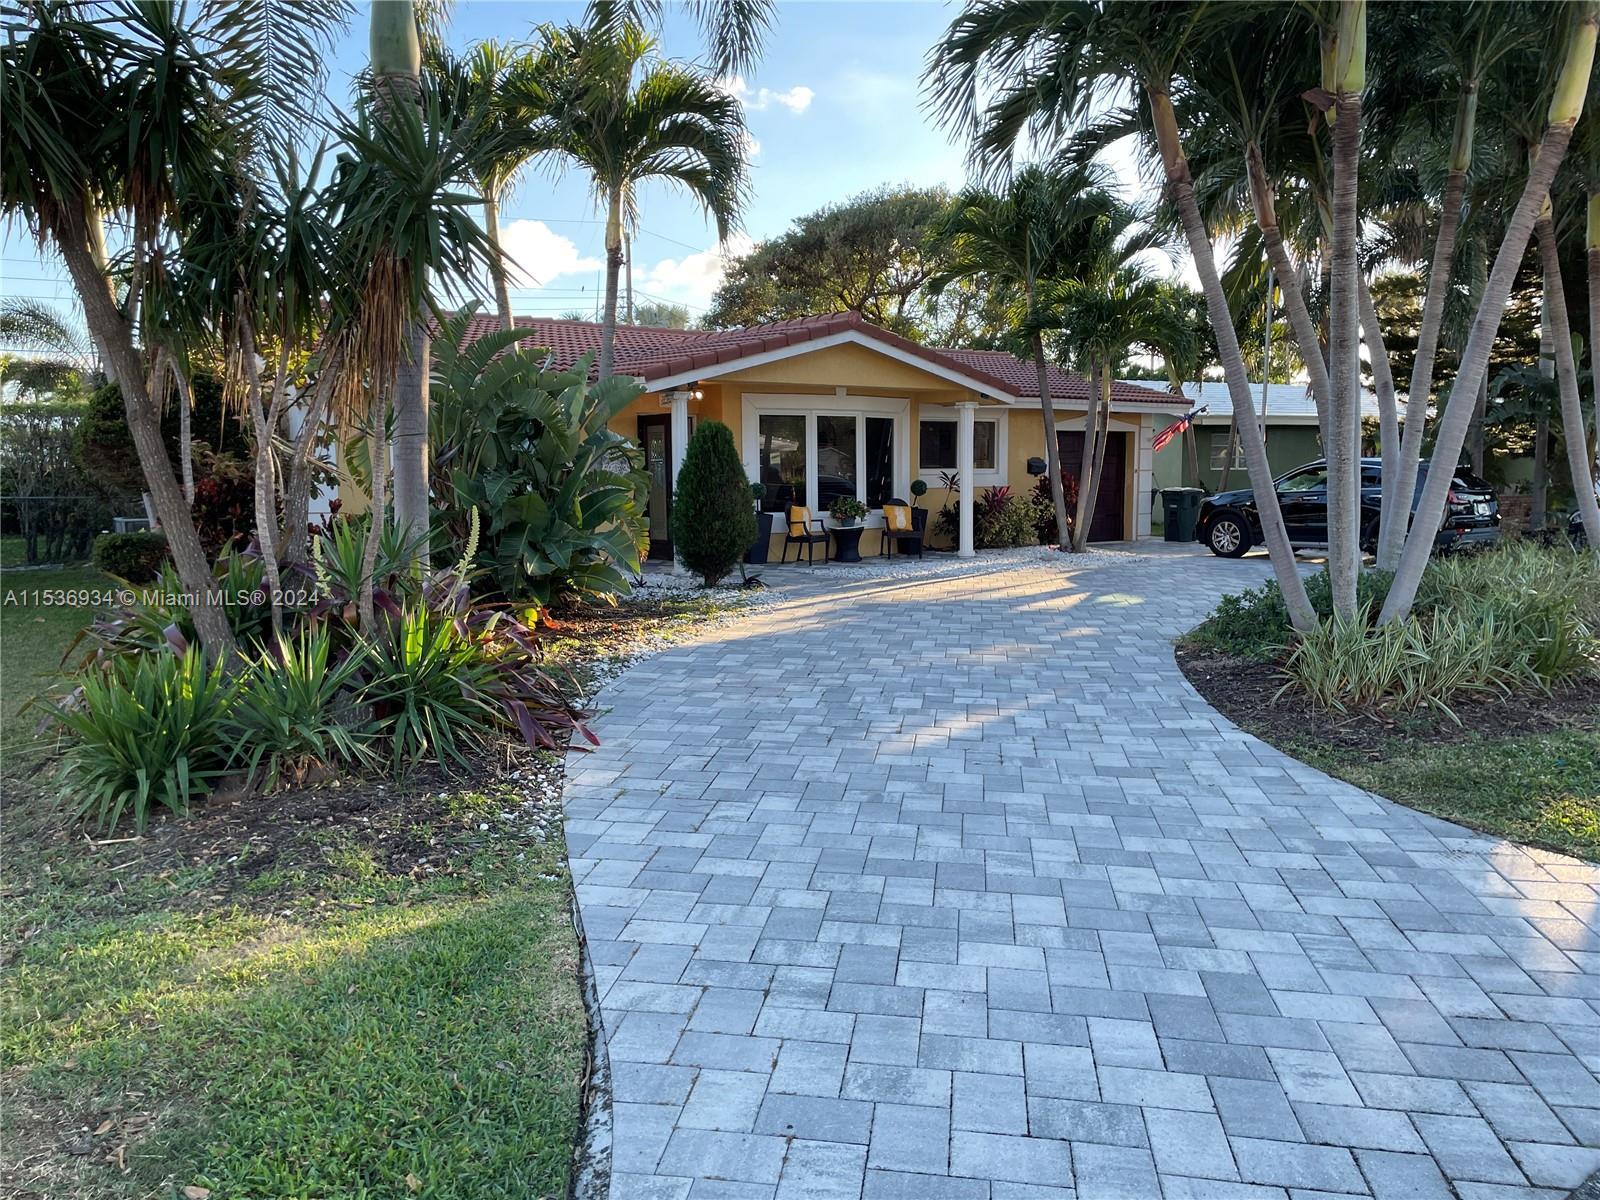 WELCOME TO BEAUTIFUL LIGHTHOUSE POINT!**
IMPECCABLE HOME WITH GORGEOUS UPDATES!** 
STAINLESS STEEL